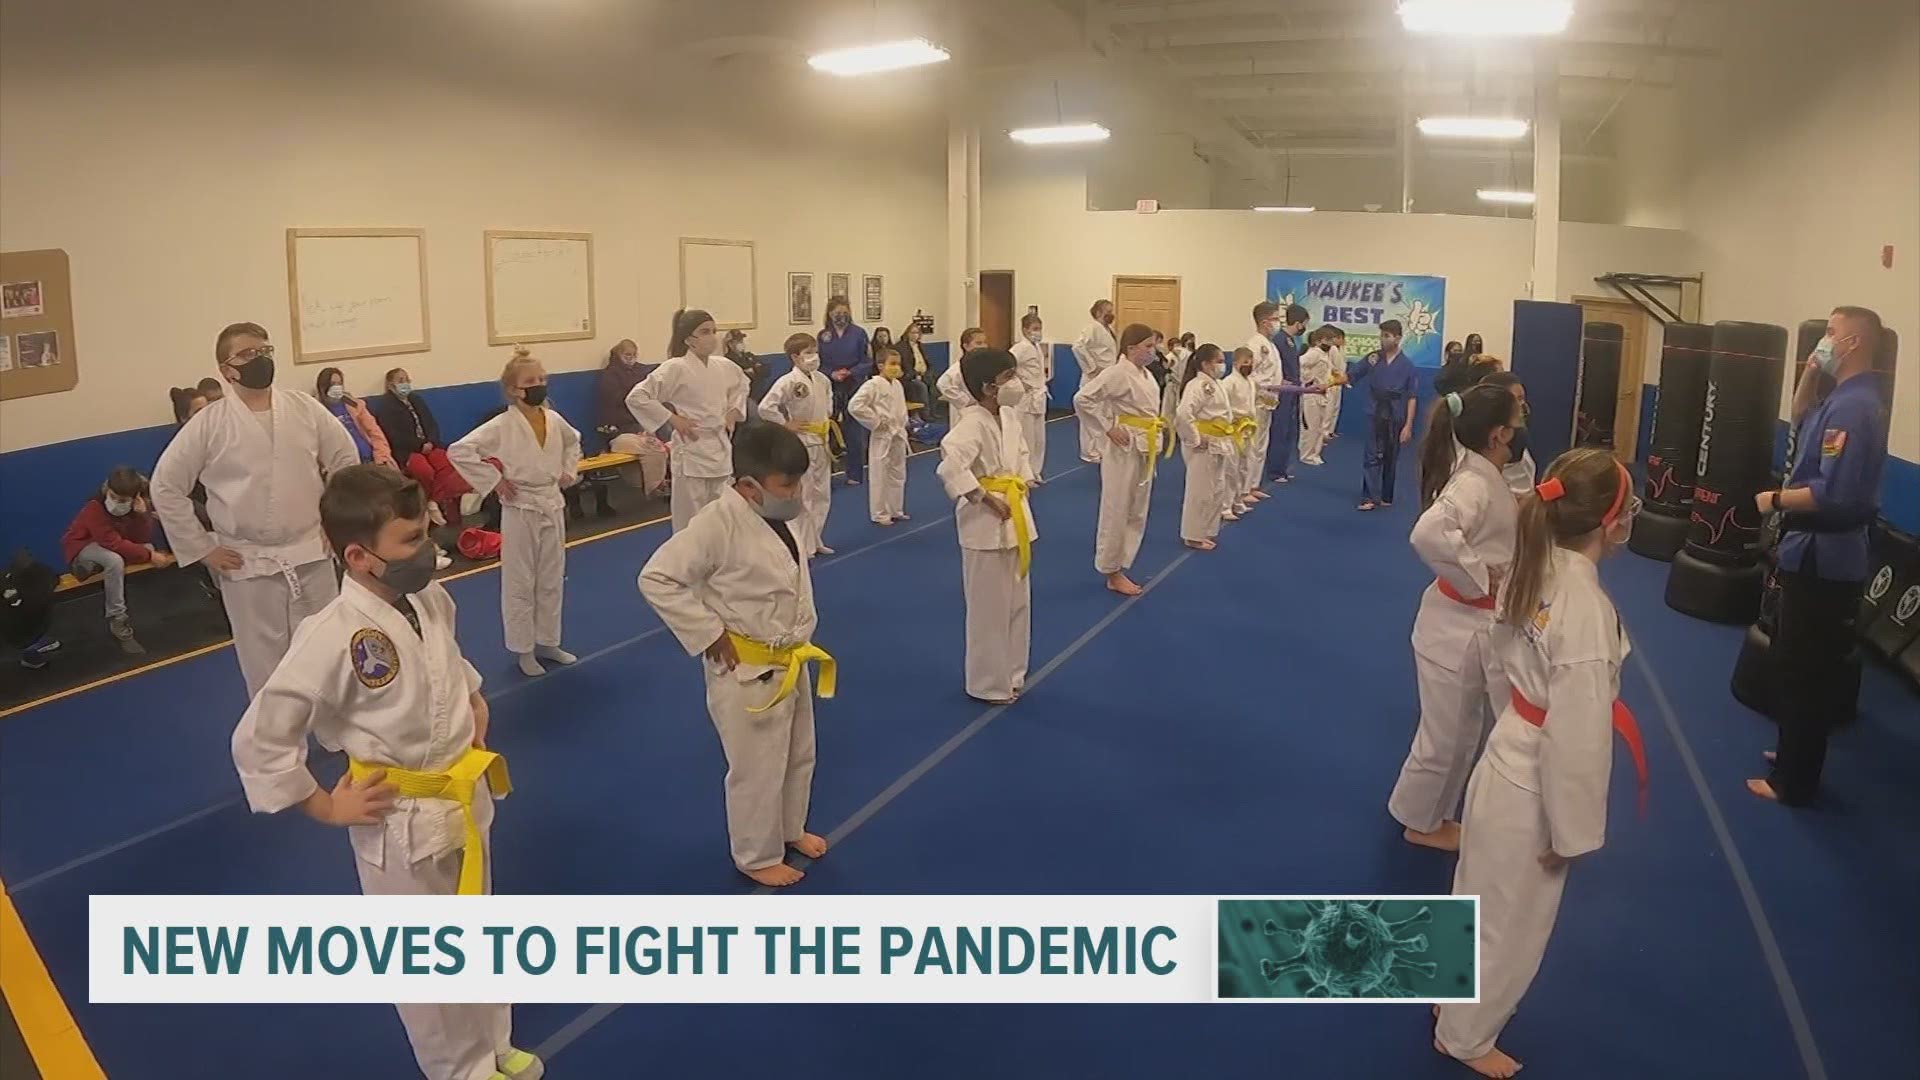 Kids' mental health has become a top issue during the COVID-19 pandemic. Activities like karate are just one way to help kids cope with pandemic-related stress.